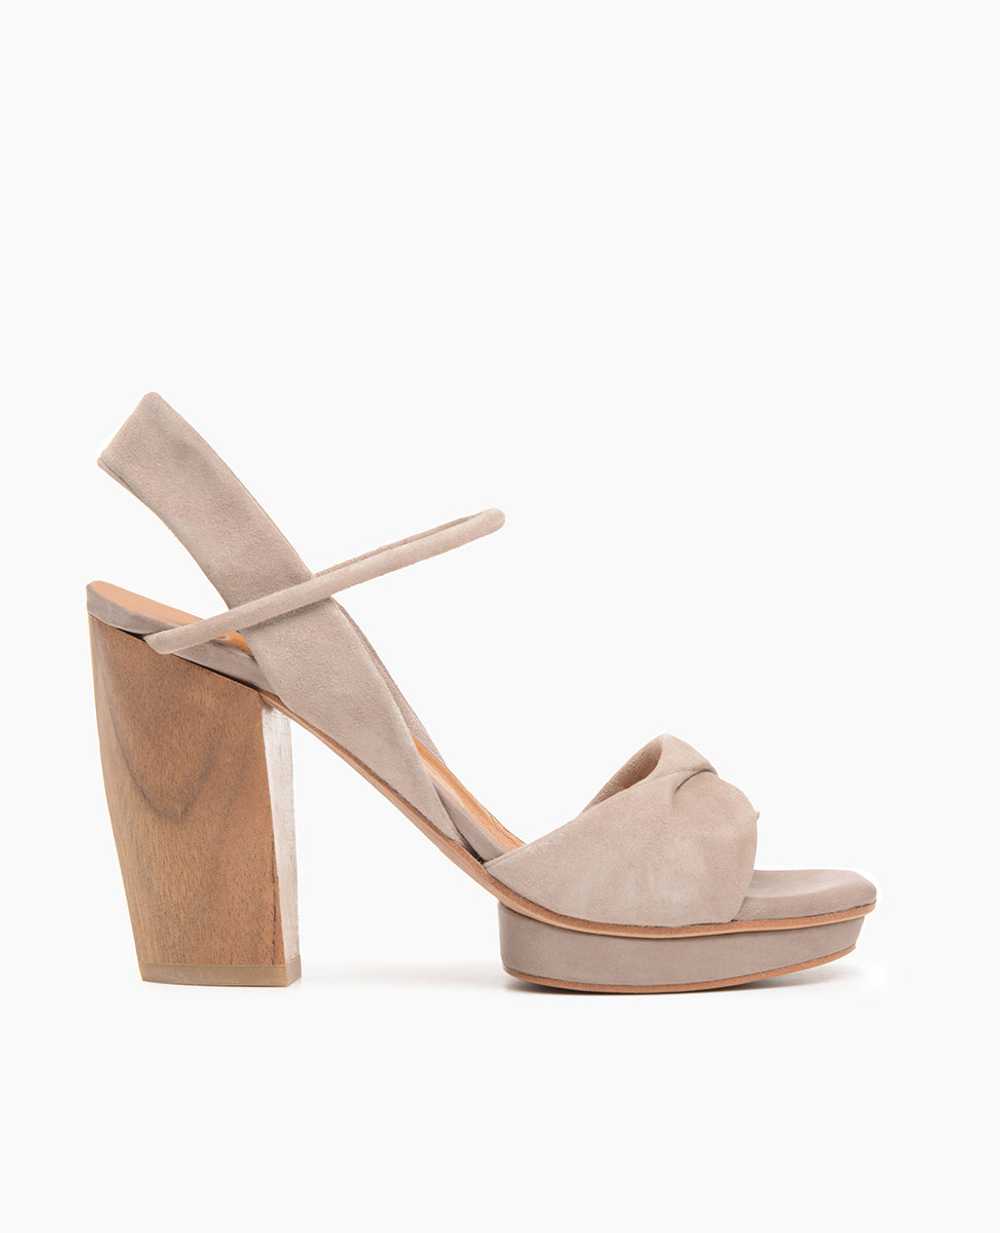 Coclico Uhoh Heel - Faun Leather & Stone Suede - image 2